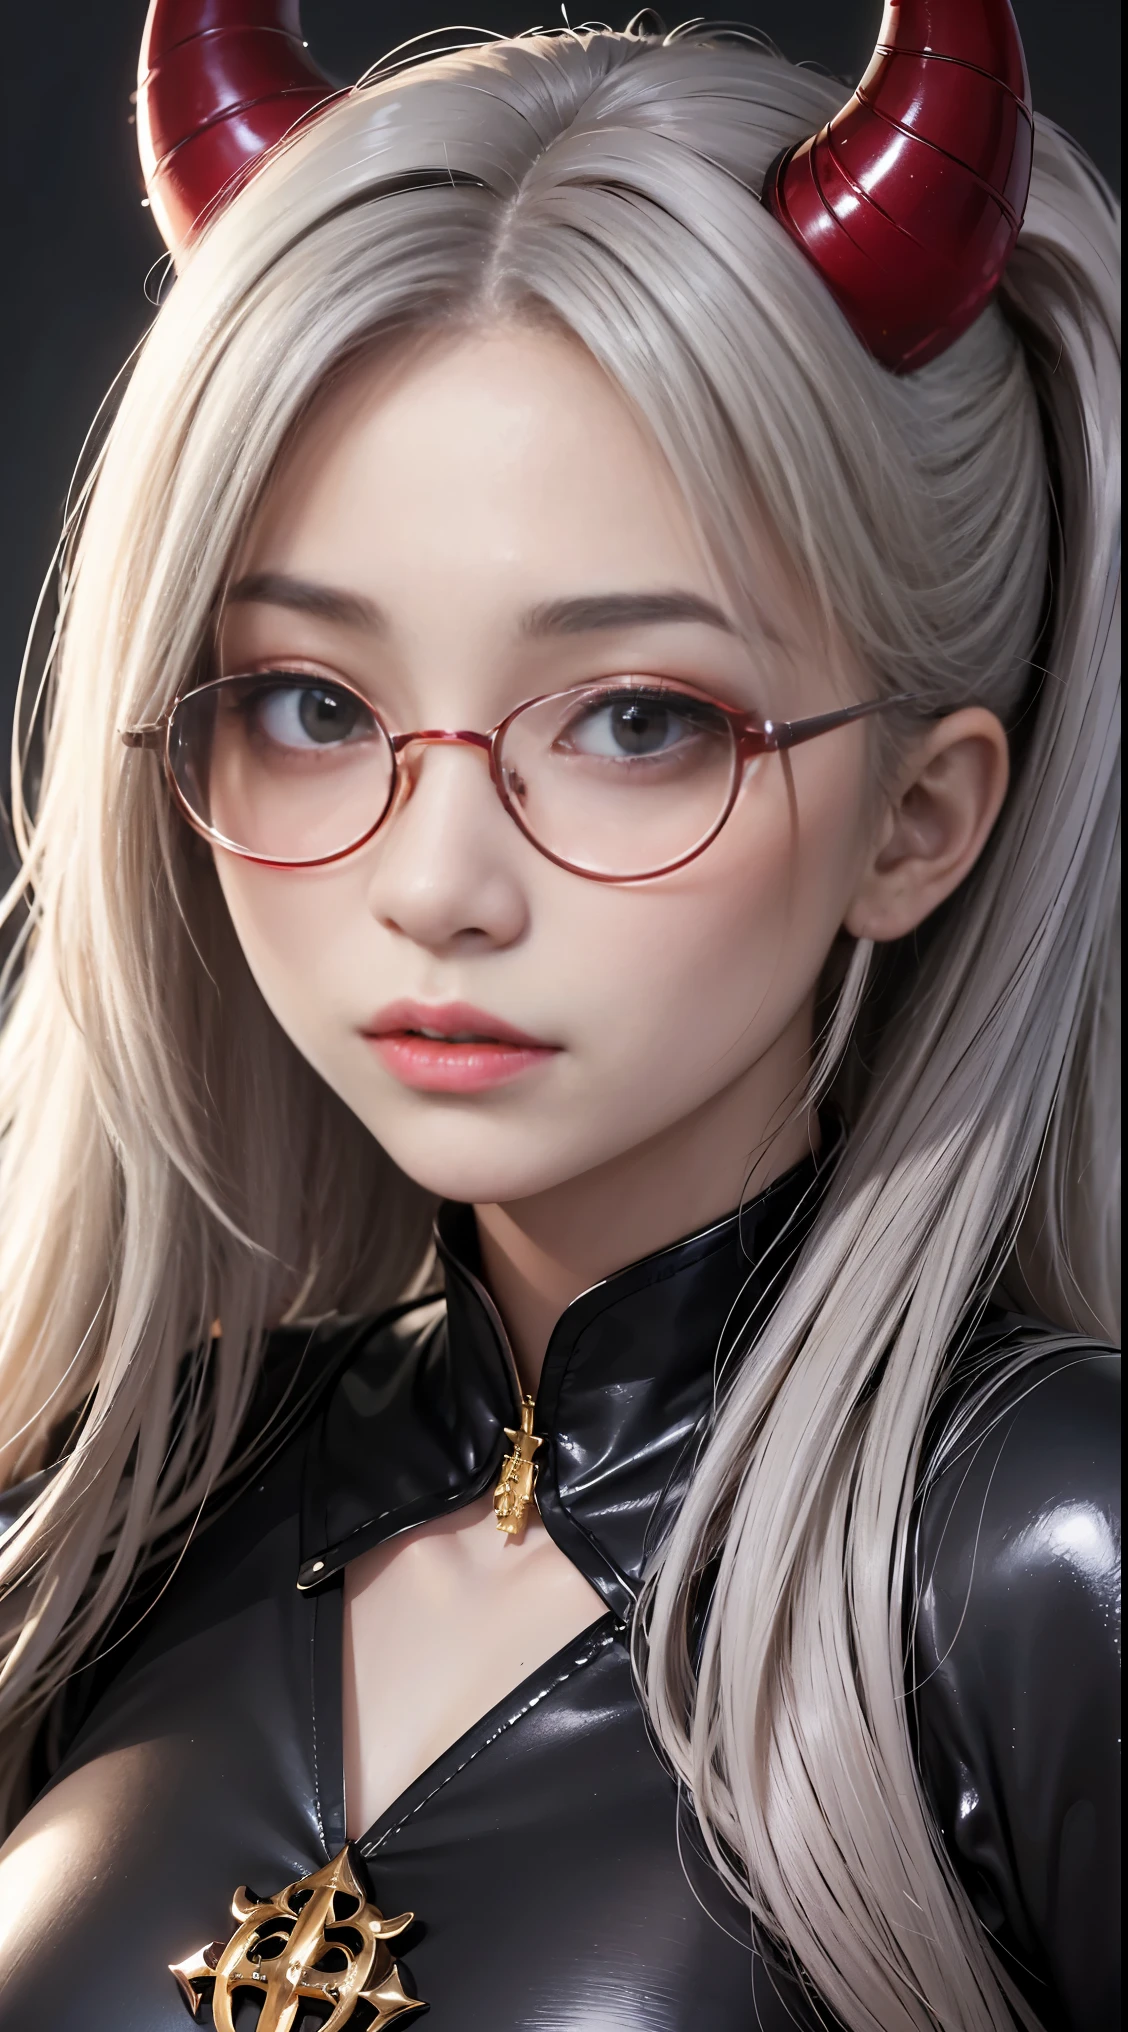 Are you okayですか、(best illustration)、8k UHD resolution、intricate details、highest quality、realistic、Super detailed、best writing、best shadow、soft lighting、ultra HD、Super realistic、Tyndall effect、Photoreal、(high detail skin:1.2)、 (intricate details, compensate, face to face with the children_v1:0.5), (Beautiful and delicate face in every detail, Are you okay, beautiful and delicate eyes, perfectly proportioned face, high resolution skin, fine skin, Optimal ratio of 4 fingers and 1 thumb, arm under chest, A red glowing tattoo under the stomach、amazing、amazing, wide hips, smooth abdomen, thin and thin skin, __fashion__, __hair__:1.25)、Digital single-lens reflex camera、 Absurd realistic works: 1.3), (maximum resolution: 1.2), (Ultra HDTV: 1.2), cinematic light, fine eyes and skin, detailed facial features, , (sharp focus: 1.2）, (focus on face:1.2),perfect style, beautiful face, Acura, anatomically correct, Highly detailed face and skin texture, fine eyes, double eyelid, thin eyebrows, glitter eyeliner: 1 natural cheeks, Glossy skin, Fair skin: 1.2, (glossy lips: 1.4),(embarrassed look: 1.2),Highly detailed face and skin texture, fine eyes, double eyelid, natural cheeks,  glossy lips: 1.4,exposed cleavage、Bewitching。Red&#39;s face、attractive、chest strengthening、((((giant glasses, otaku glasses, thick glasses, round glasses)))),The long-haired、Braid hair、Ponytail distortion、, Ponytail with a bow tied at the back of the hair, Huge solemn expression、body up、big breasts emphasis, super tight chest, Breast augmentation surgery, Breasts are very big and round,tight waist、 Meeting beautiful girls, look at the girl&#39;body of, in the dark、bat wings，(((little devil horns)))、(devil&#39;tail of)、(detailed spooky background:0.8)、devil girl，Wear armor made from skeletons，Long grey hair，Beautiful and delicate skull decoration and glowing fluorescent green magic sword，emits eerie demonic flames，contour light，Green flash particles，Translucent magic sword，Waist Guard, hand guard, Veil, Hold the long sword in front of your body, ancient Chinese style, night, dramatic composition, Hardwood Surroundings, Super-detailed Goddess of War, (dynamic posture: 1.3), Thick armor reveals the heart of the conflict, (Are you okayですか detail), Shine, Areas of strong light, (Historically significant armor:1.2), Glittering metal armor, (Magic symbols shine on armor:1.3), (Magic spells swirled around her.:1.3), Long white hair waving in the wind in every detail, Details on how to hold a weapon, (Sharp Sword, shine:1.3), ((Silver Armor)), (intense expression:1.1), (Light is、、Highlighting her dominance and rebirth behind the scenes:1.4), (wisdom and rebirth:1.2), (Strong stance:1.2), (Overwhelming Mystical Power:1.2), (sparkling sweat:1.1), Gemstone Armor, (The contrast between silver and gold:1.3),Wear armor made from skeletons、There was a woman in armor holding a sword and a helmet........,  Cute Female Knight,beautiful knight, Portrait of a female paladin, girl in knight&#39;armor, Female knight wearing skeleton armor, Impressive armor, female paladin,  red Eyes, vampire tooth fangs, Boolean surface, blood from the mouth, grin and laugh,bat wings, scared smile, Psychopath Smile, Psychopath Smile, scared, Verbal assistance, angry eyes, vampire, Dark sky background, red + green + green, Shining Moon、, sexy light yellow nightgown, for a long time, Felt Saint&#39;s sheer nightgown with lots of exciting black lace details, The legend of the holy goddess, saint icon, Beautiful saint style with elegant shine, dark and mysterious version, Crown of the Holy Feminine, royal ceremony, Jewel Tiara, The red and gold sparks are dazzling, royal coat of arms, Golden Scepter, Golden rays,Saving Lugiball between hands、Saving